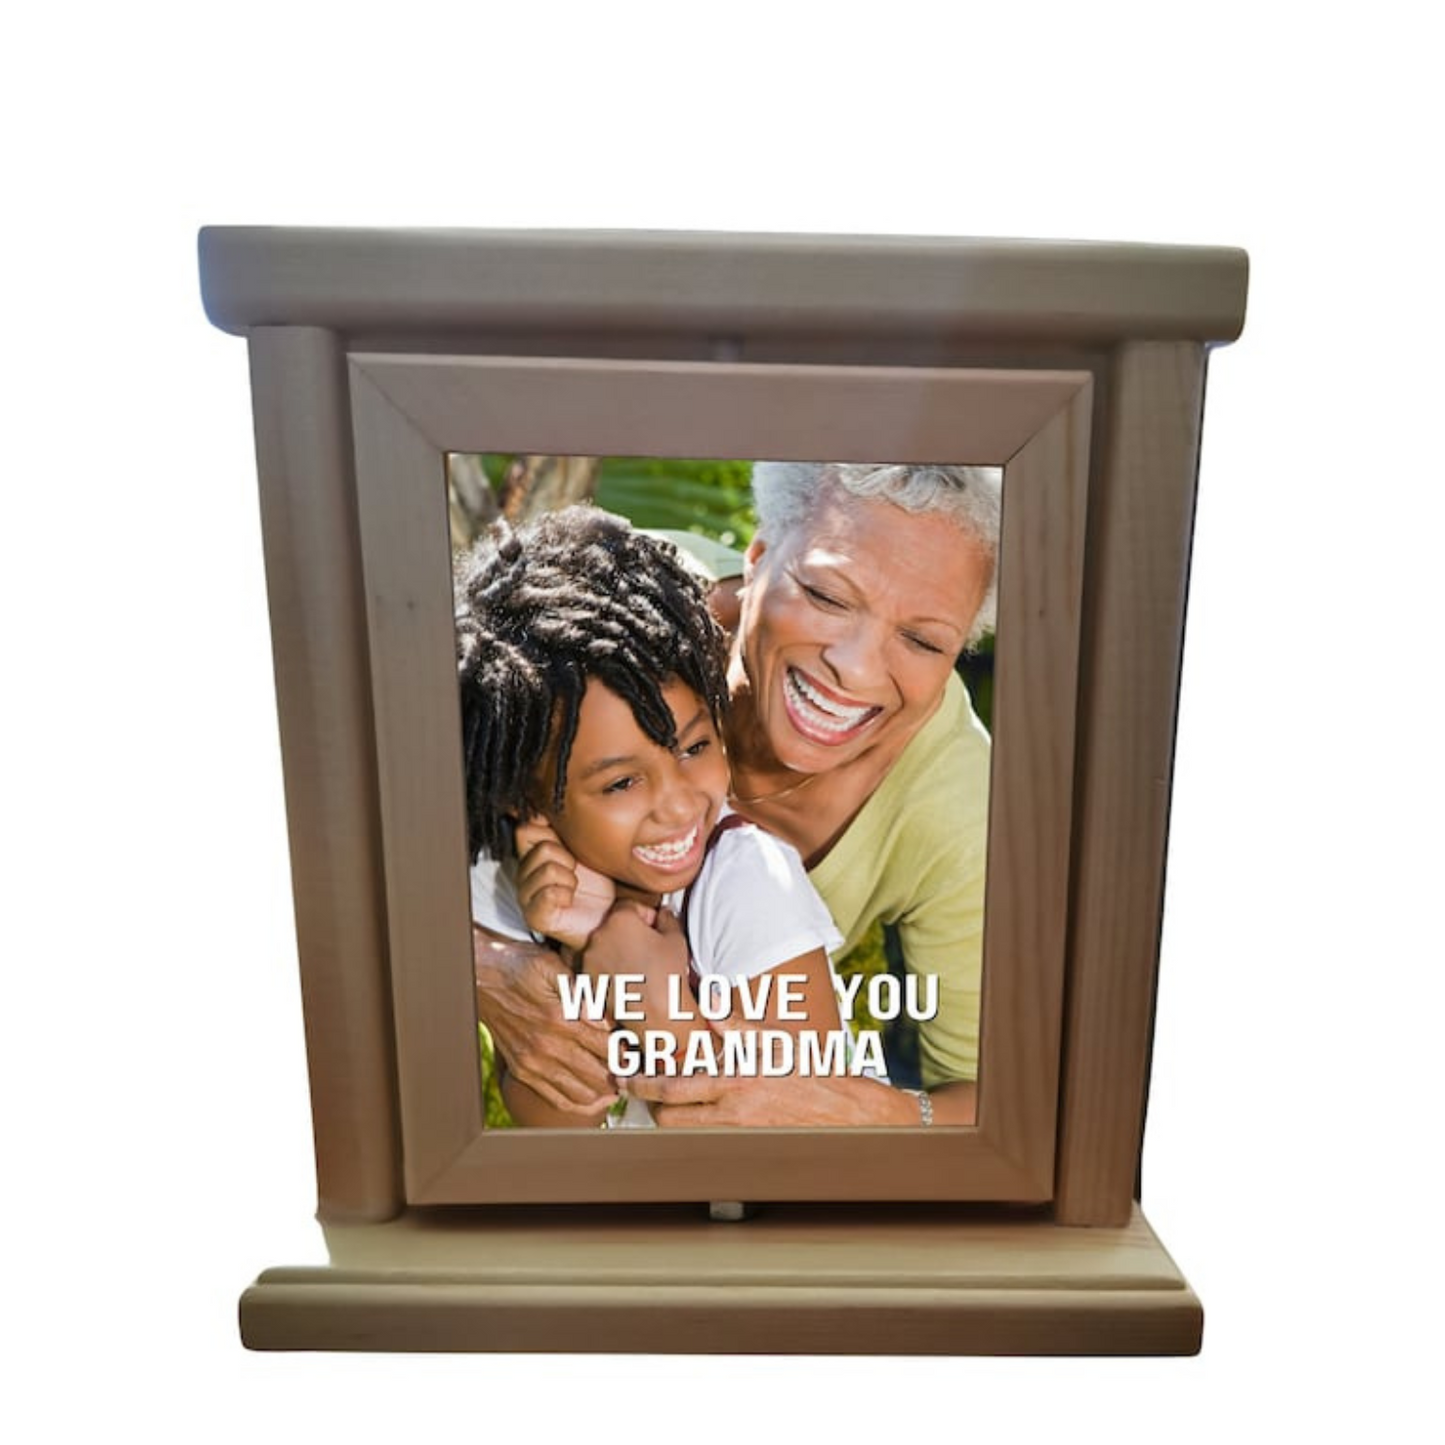 Spinning bamboo frame with 2 x printed photos